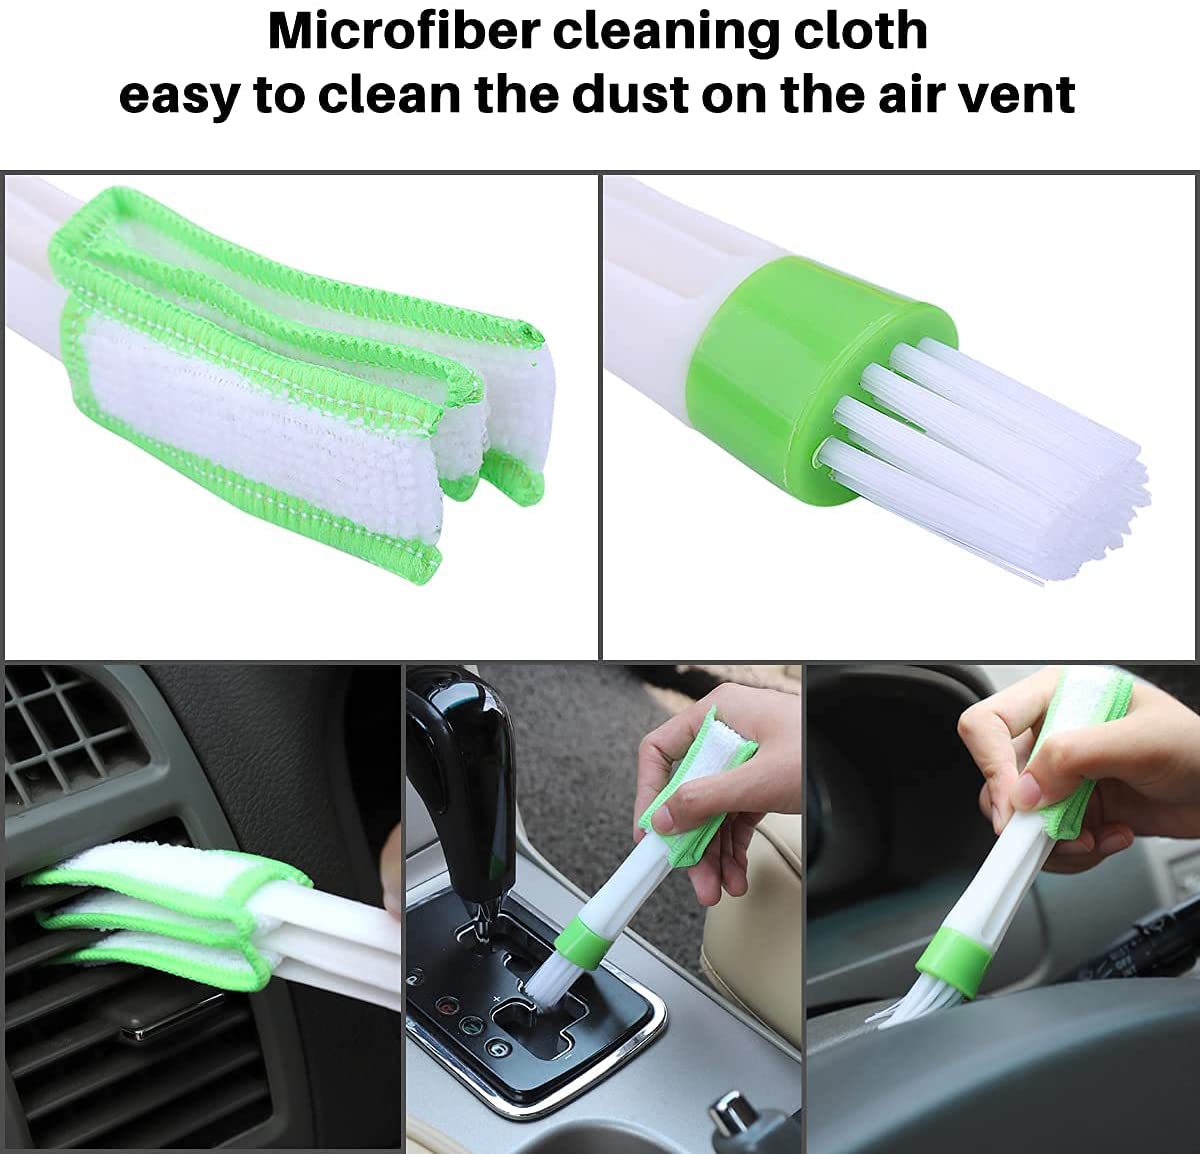 Car Wash Cleaning Tools Kit Car Detailing Set for Clean Inside and Outside The Car with Wash Bucket Bracket Big Towels Car Wash Mitts Tire Brush Window Water Blade Car Wash Sponge Wax Applicators etc.